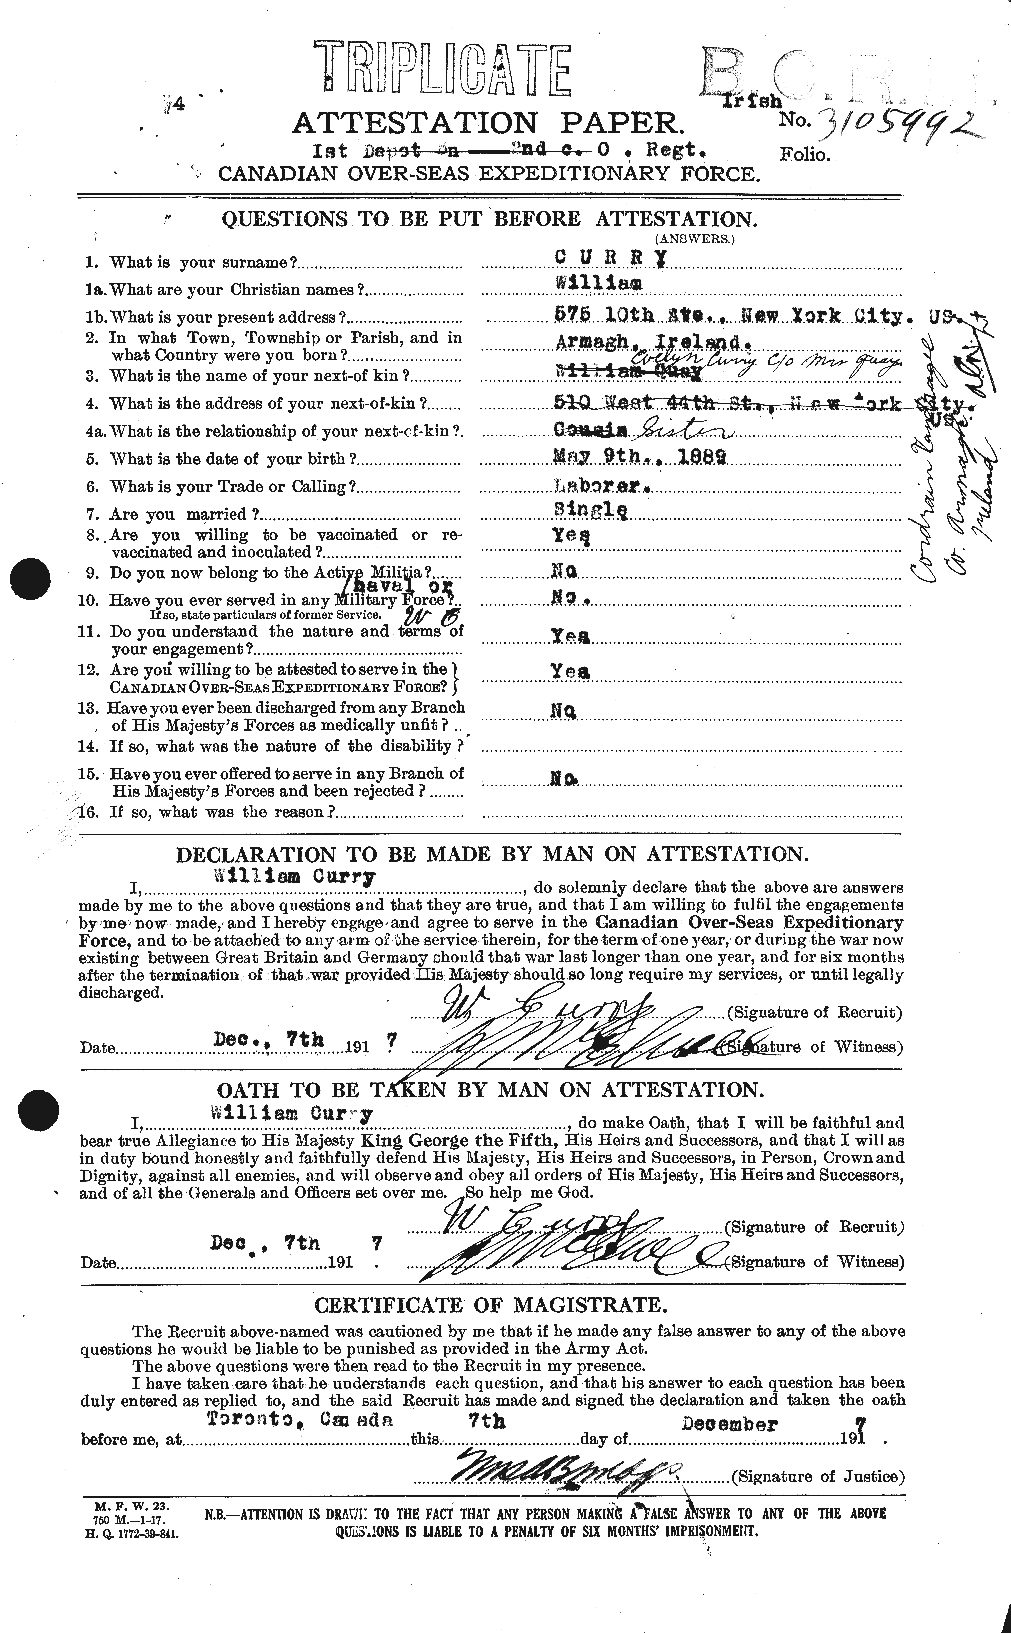 Personnel Records of the First World War - CEF 070556a